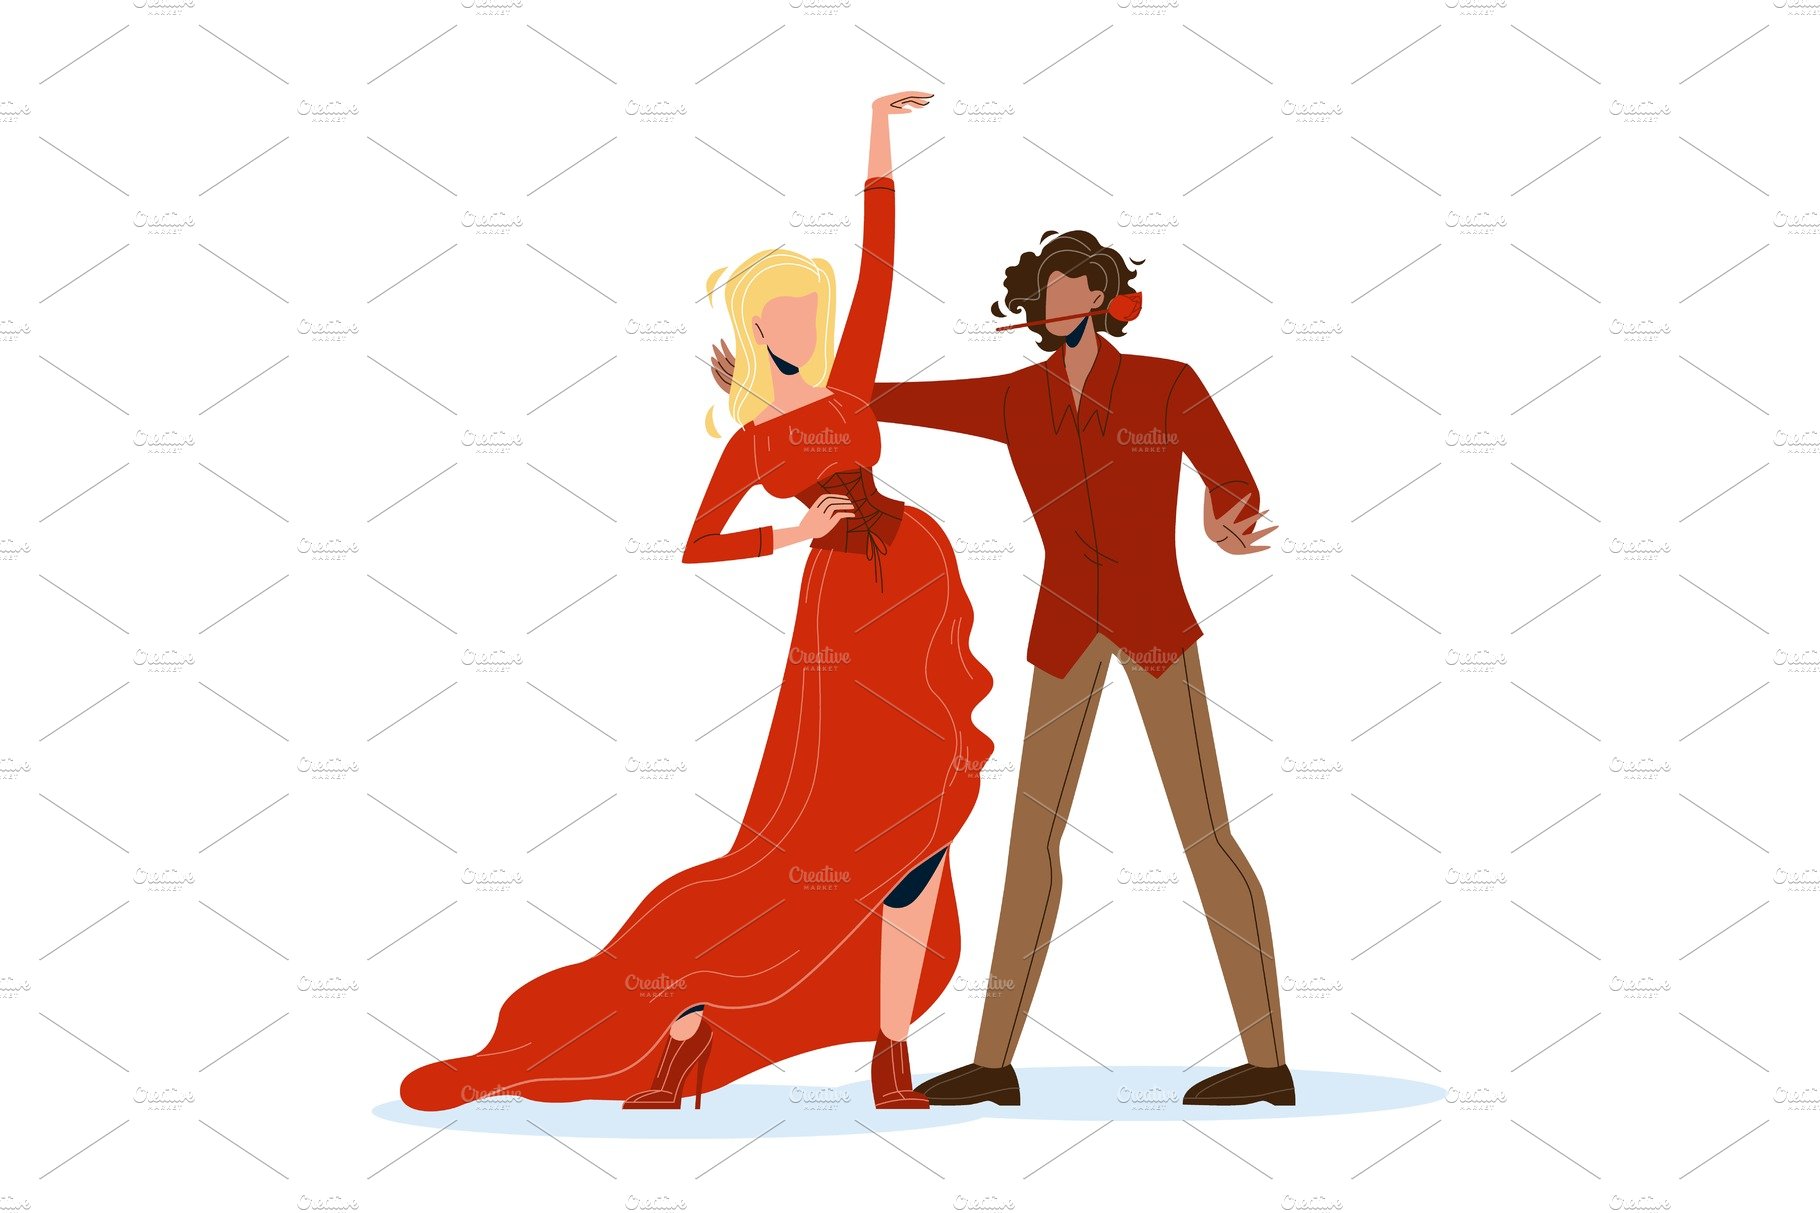 Woman And Man Dancers Dancing cover image.